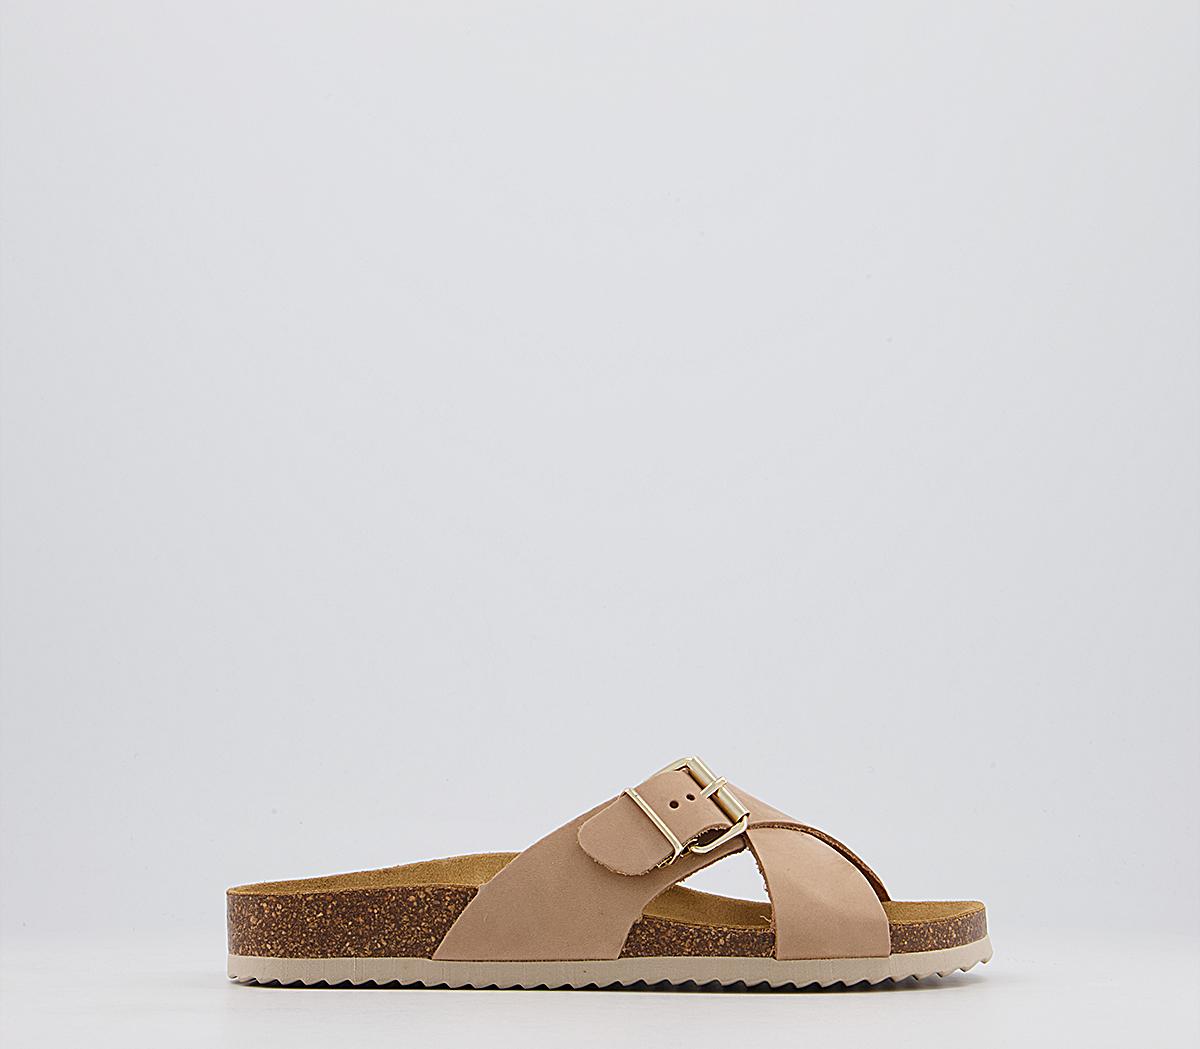 OFFICESomehow Cross Strap Buckle Footbed SandalsCamel Nubuck